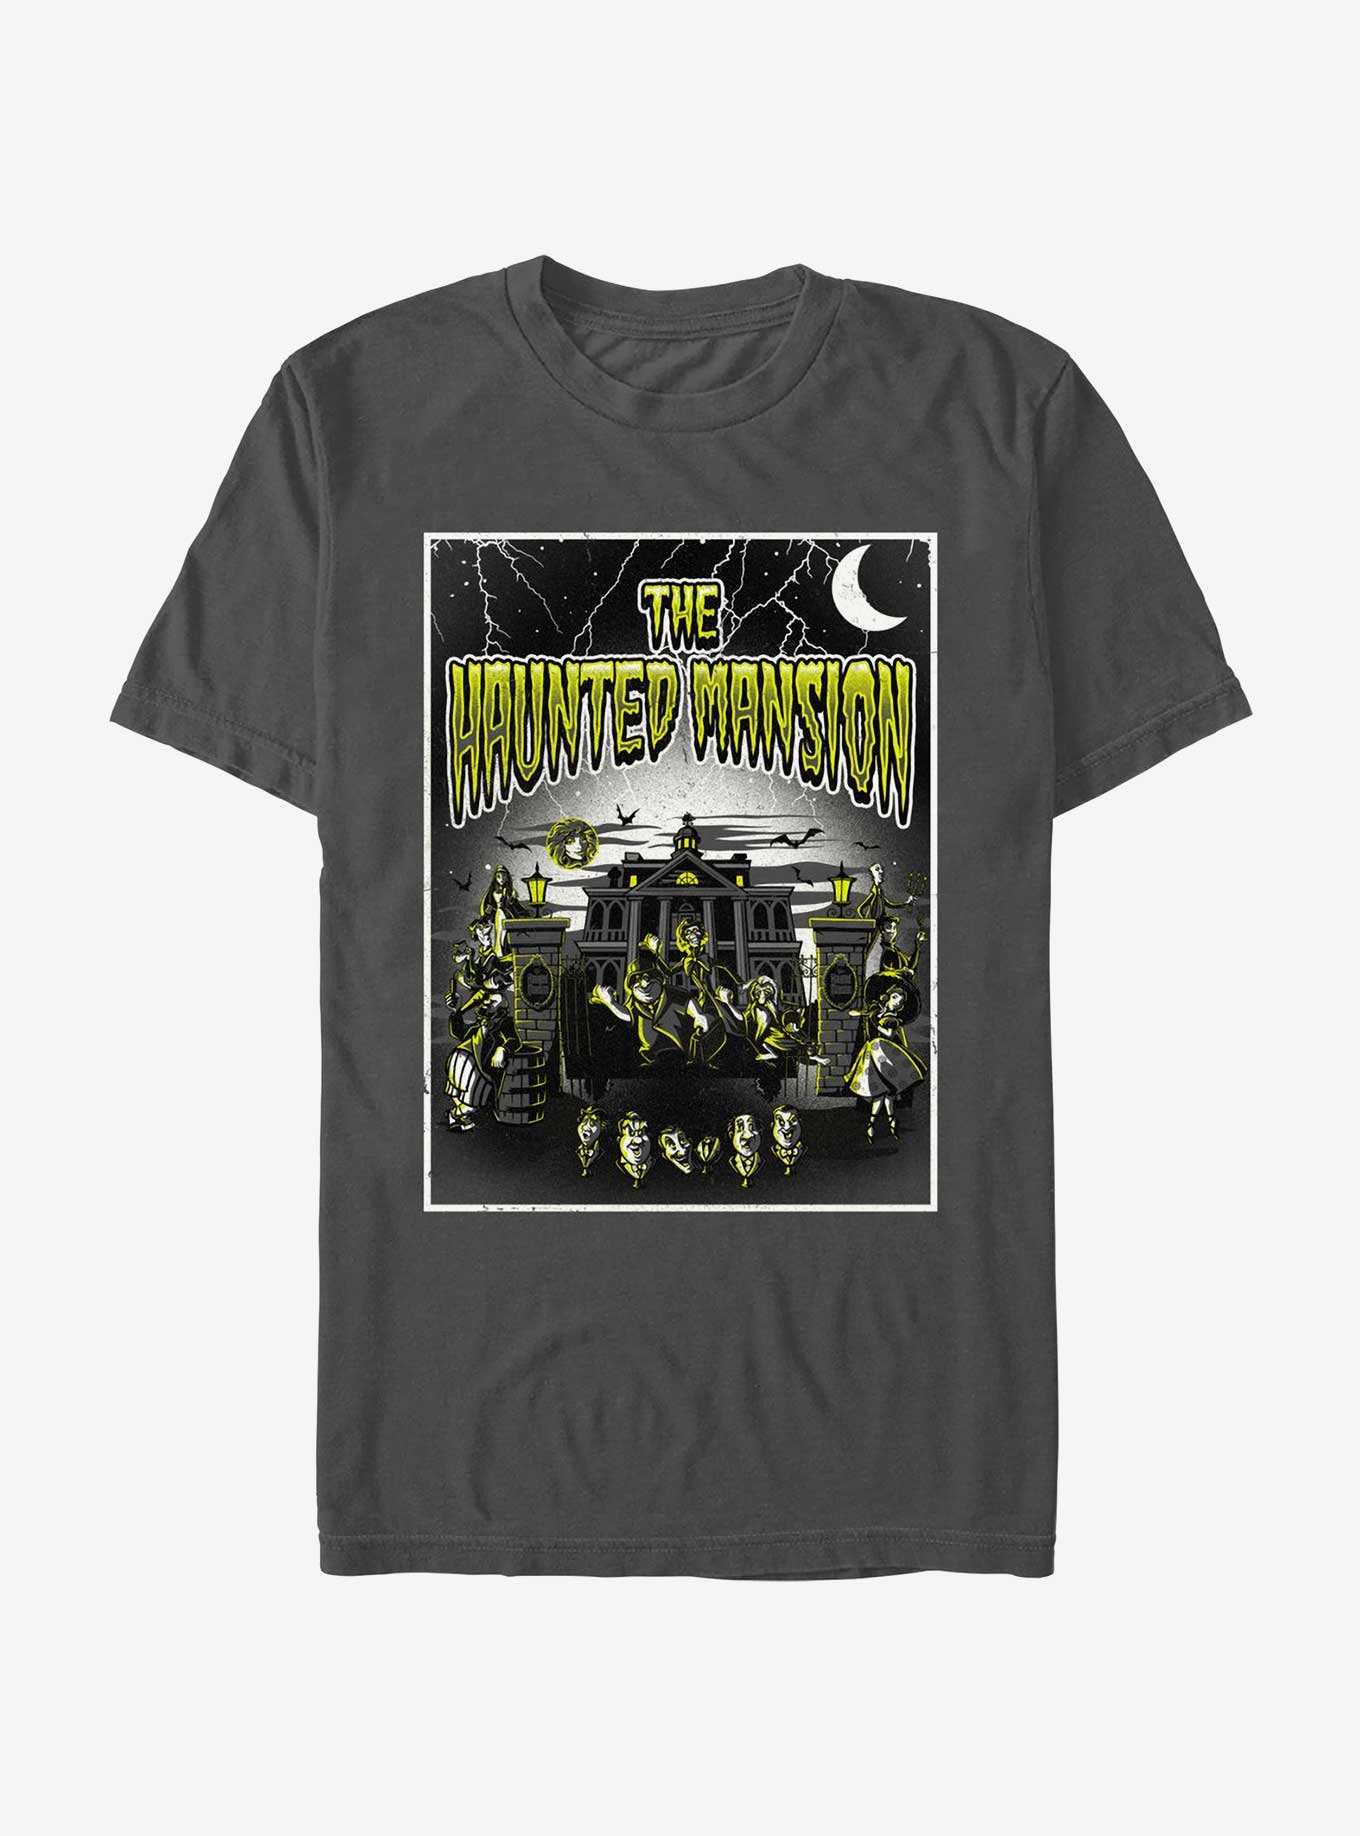 Disney Haunted Mansion Horror Mansion Poster Extra Soft T-Shirt Hot Topic Web Exclusive, , hi-res